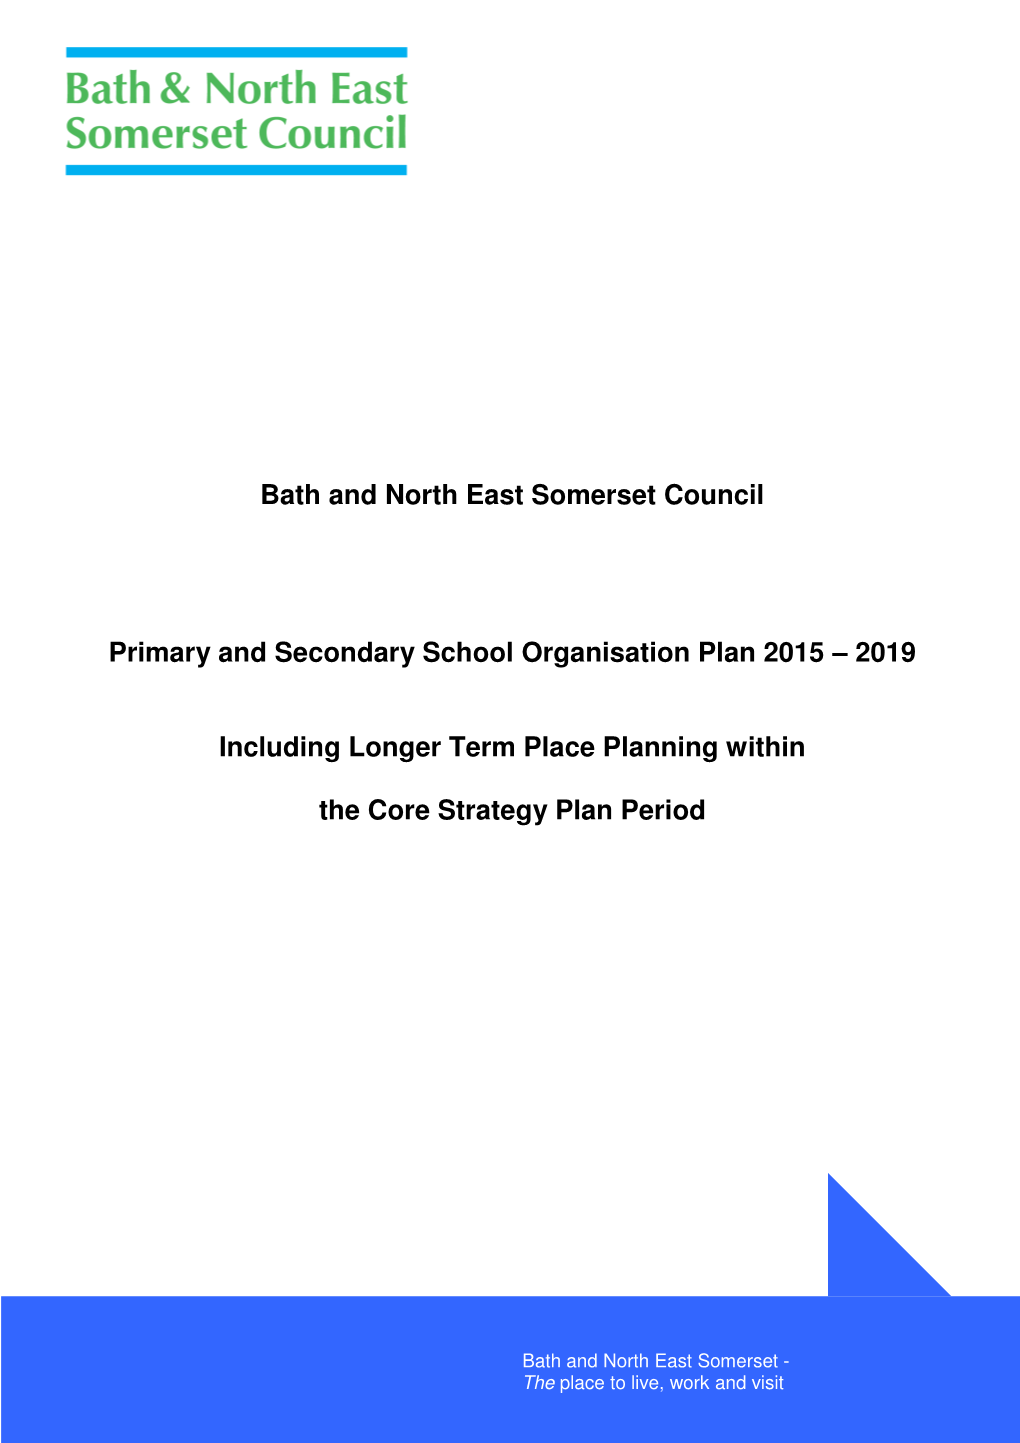 Primary and Secondary School Organisation Plan 2015 – 2019